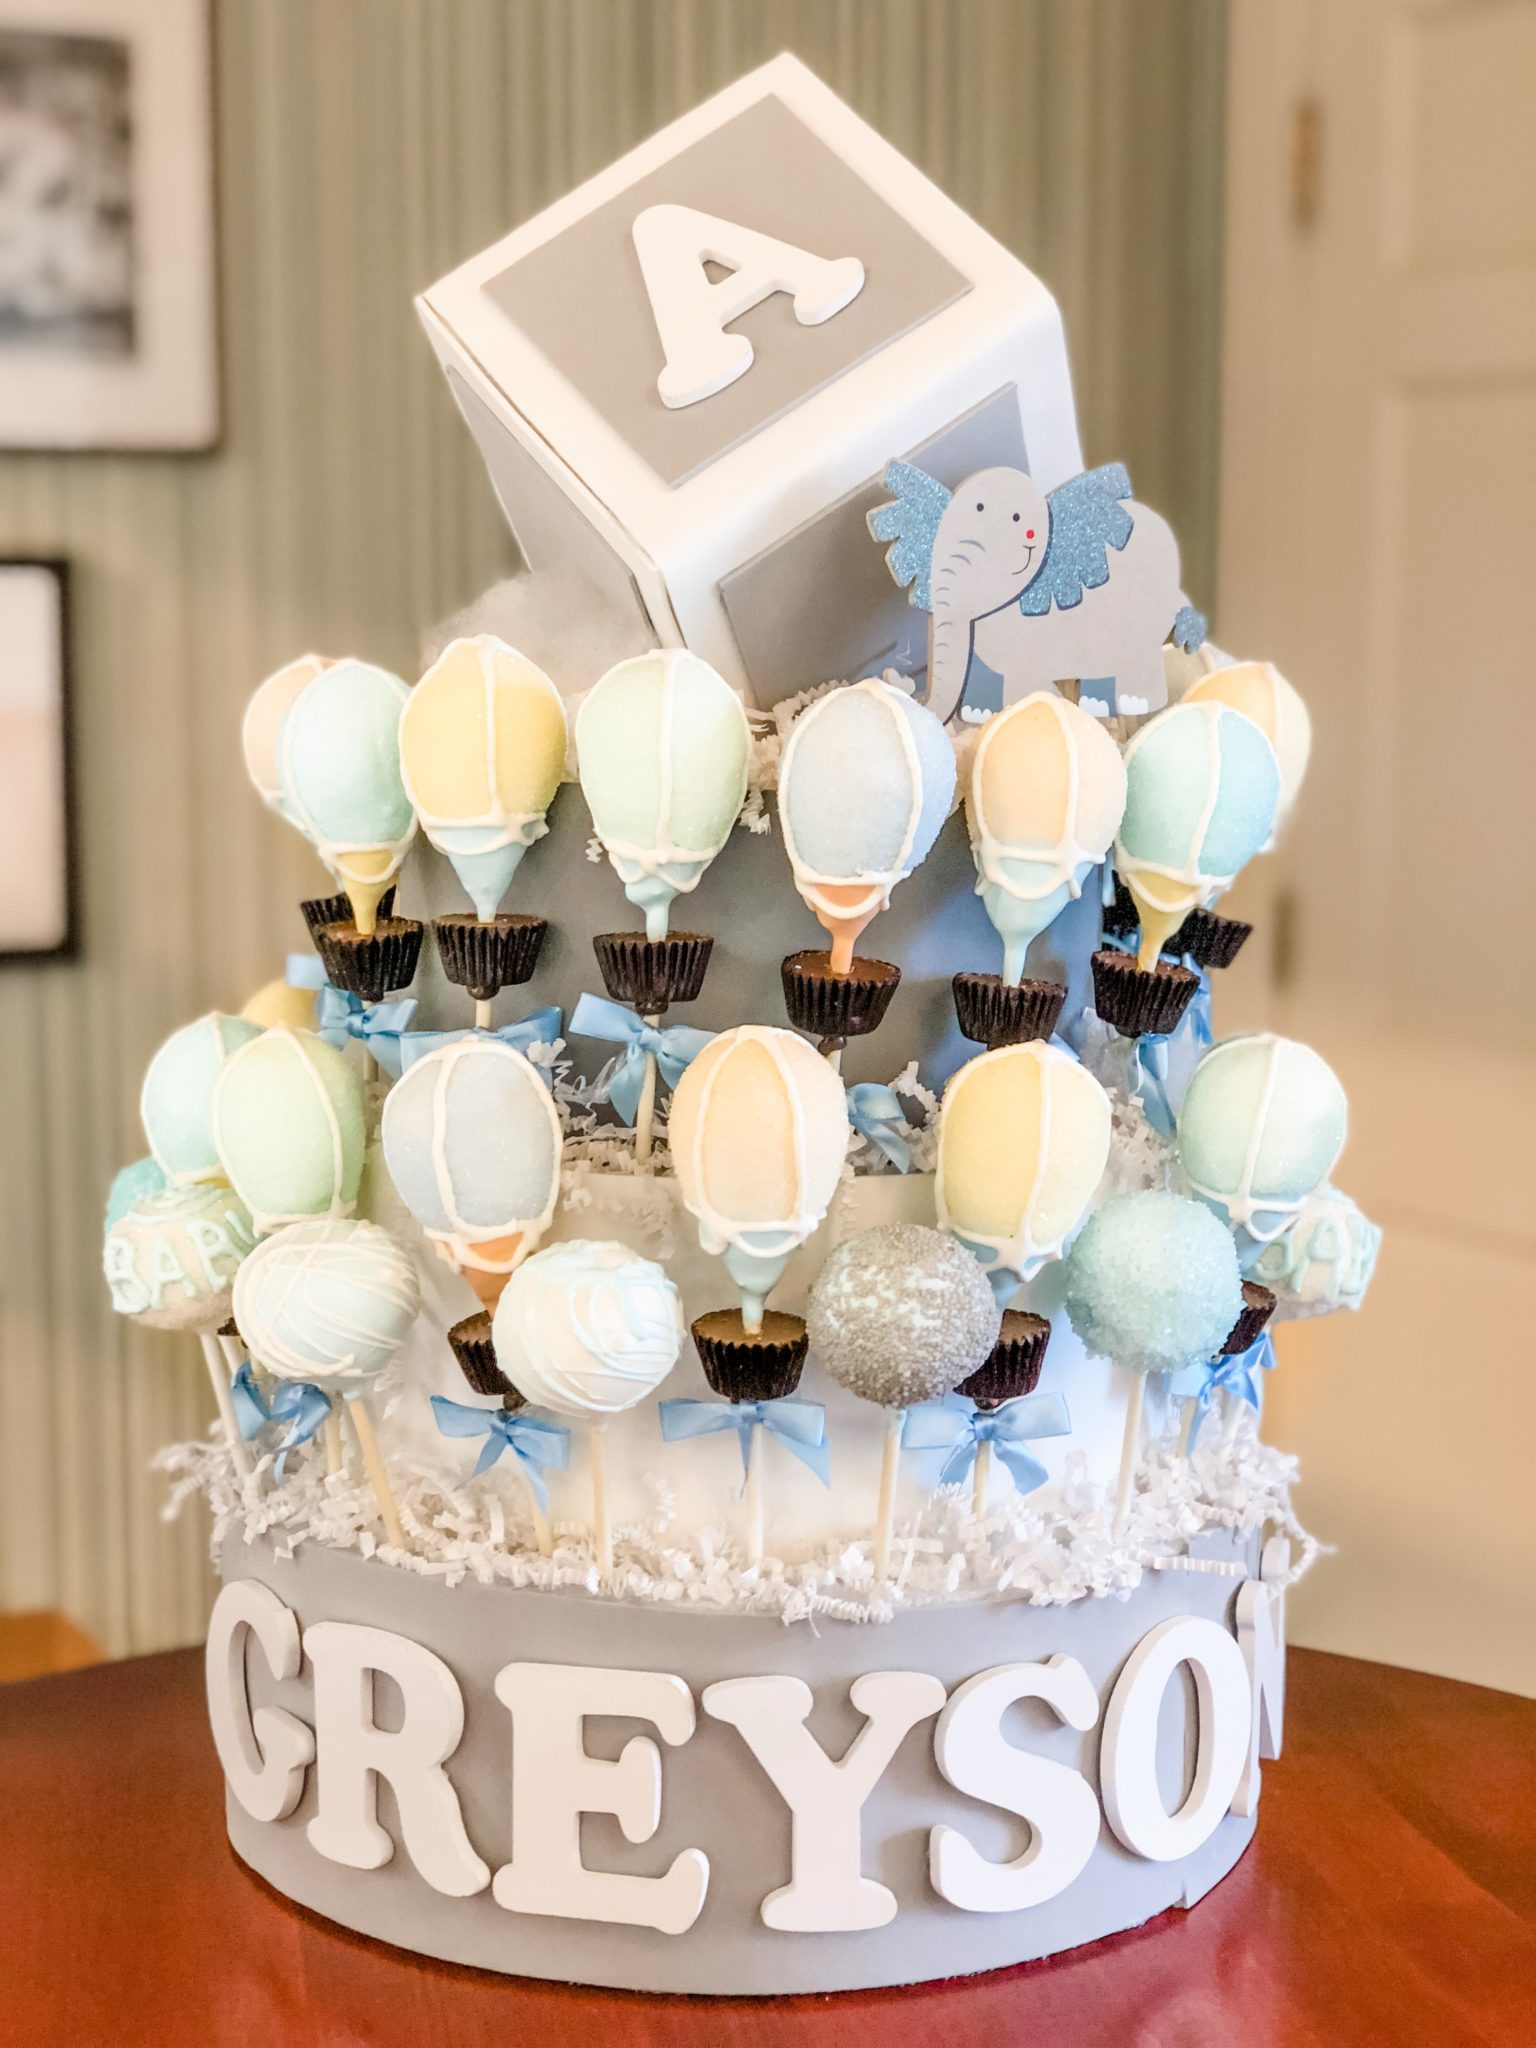 Custom cake pop display filled with baby shower themed cake pops.